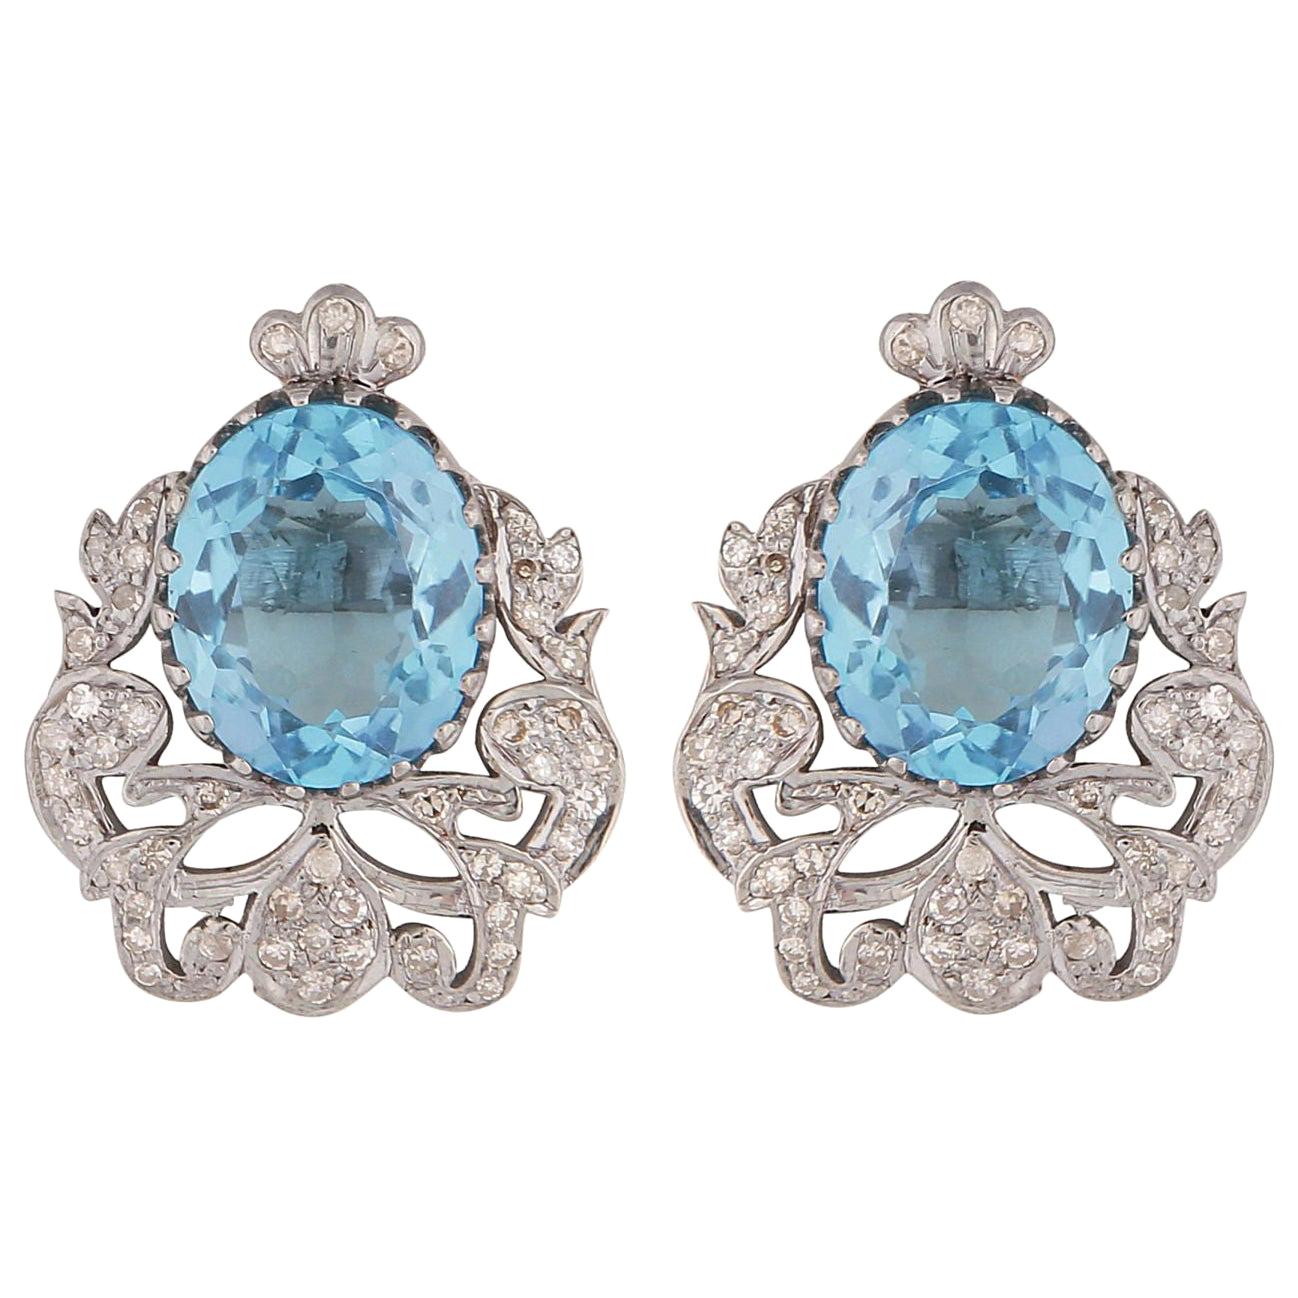 Art Deco Style Ornate Stud Earrings with Blue Topaz and Diamonds